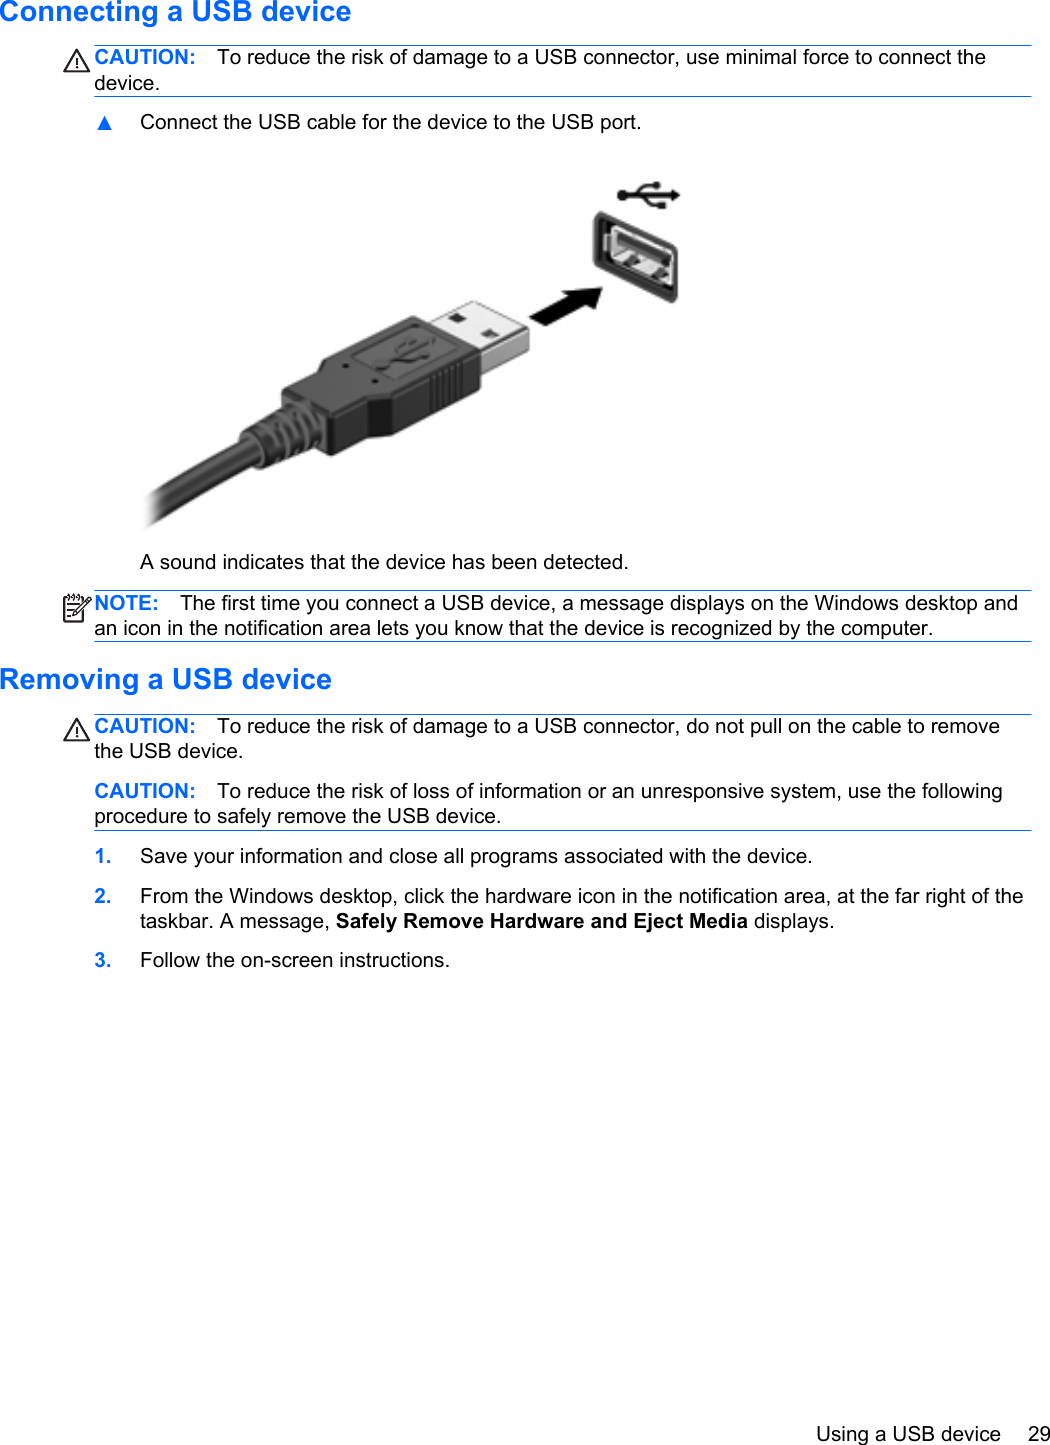 Connecting a USB deviceCAUTION: To reduce the risk of damage to a USB connector, use minimal force to connect thedevice.▲Connect the USB cable for the device to the USB port.A sound indicates that the device has been detected.NOTE: The first time you connect a USB device, a message displays on the Windows desktop andan icon in the notification area lets you know that the device is recognized by the computer.Removing a USB deviceCAUTION: To reduce the risk of damage to a USB connector, do not pull on the cable to removethe USB device.CAUTION: To reduce the risk of loss of information or an unresponsive system, use the followingprocedure to safely remove the USB device.1. Save your information and close all programs associated with the device.2. From the Windows desktop, click the hardware icon in the notification area, at the far right of thetaskbar. A message, Safely Remove Hardware and Eject Media displays.3. Follow the on-screen instructions.Using a USB device 29